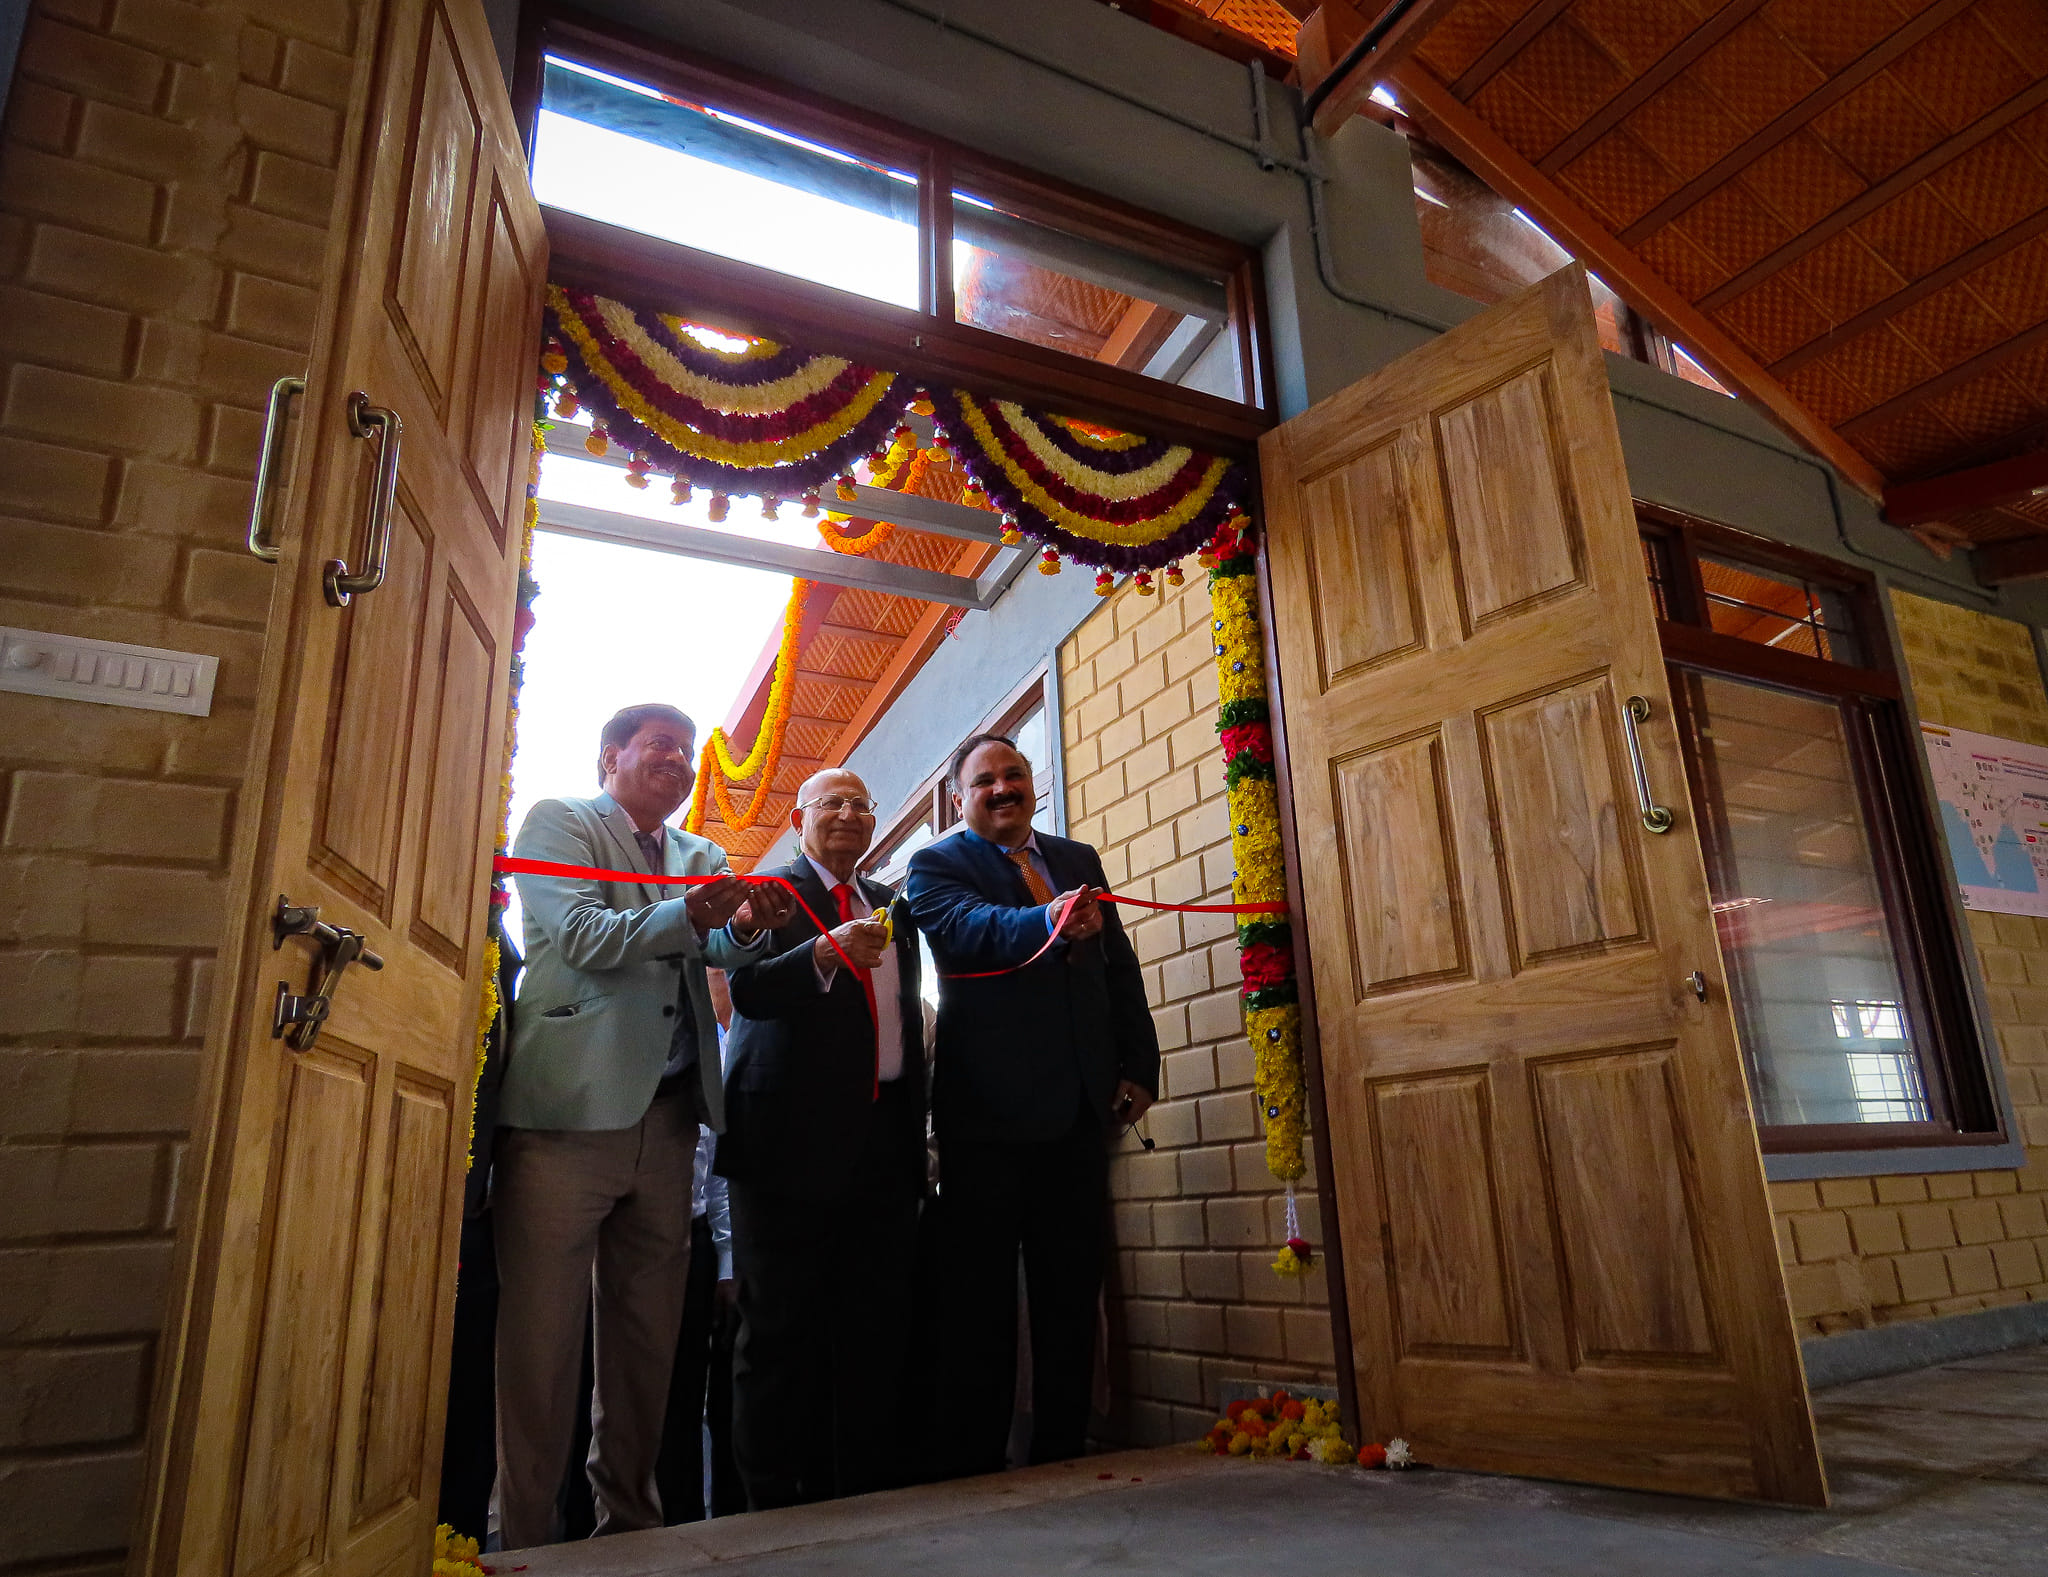 R.S. Paroda (center) cuts the ribbon to inaugurate the maize doubled haploid facility in Kunigal, Karnataka state, India. He is flanked by S. Rajendra Prasad (left), vice chancellor of UAS Bangalore and B.M. Prasanna (right), director of CIMMYT’s Global Maize Program and the CGIAR Research Program on Maize. (Photo: CIMMYT)